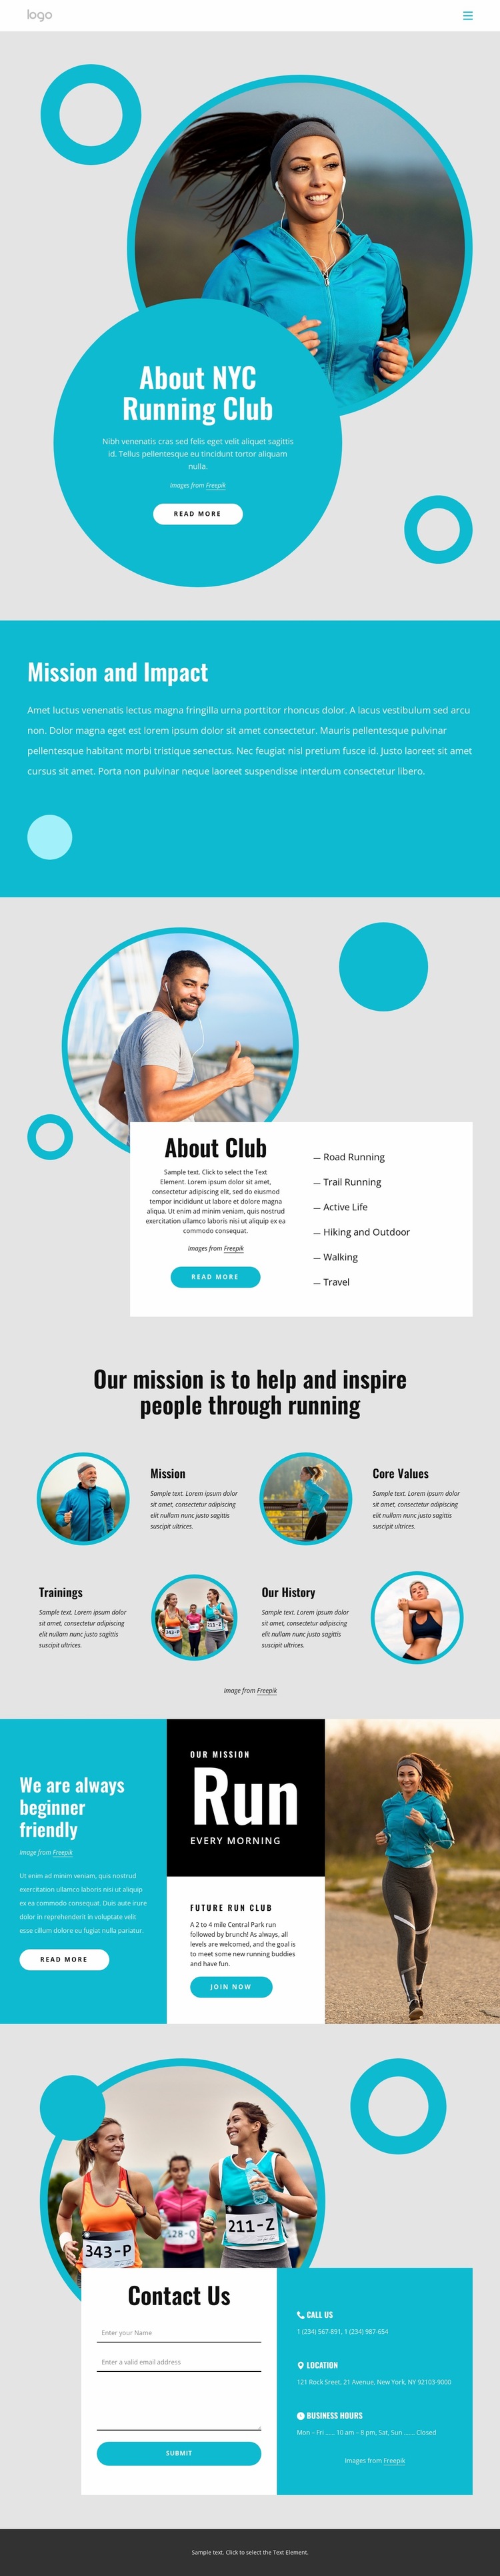 About NYC running club Website Builder Templates